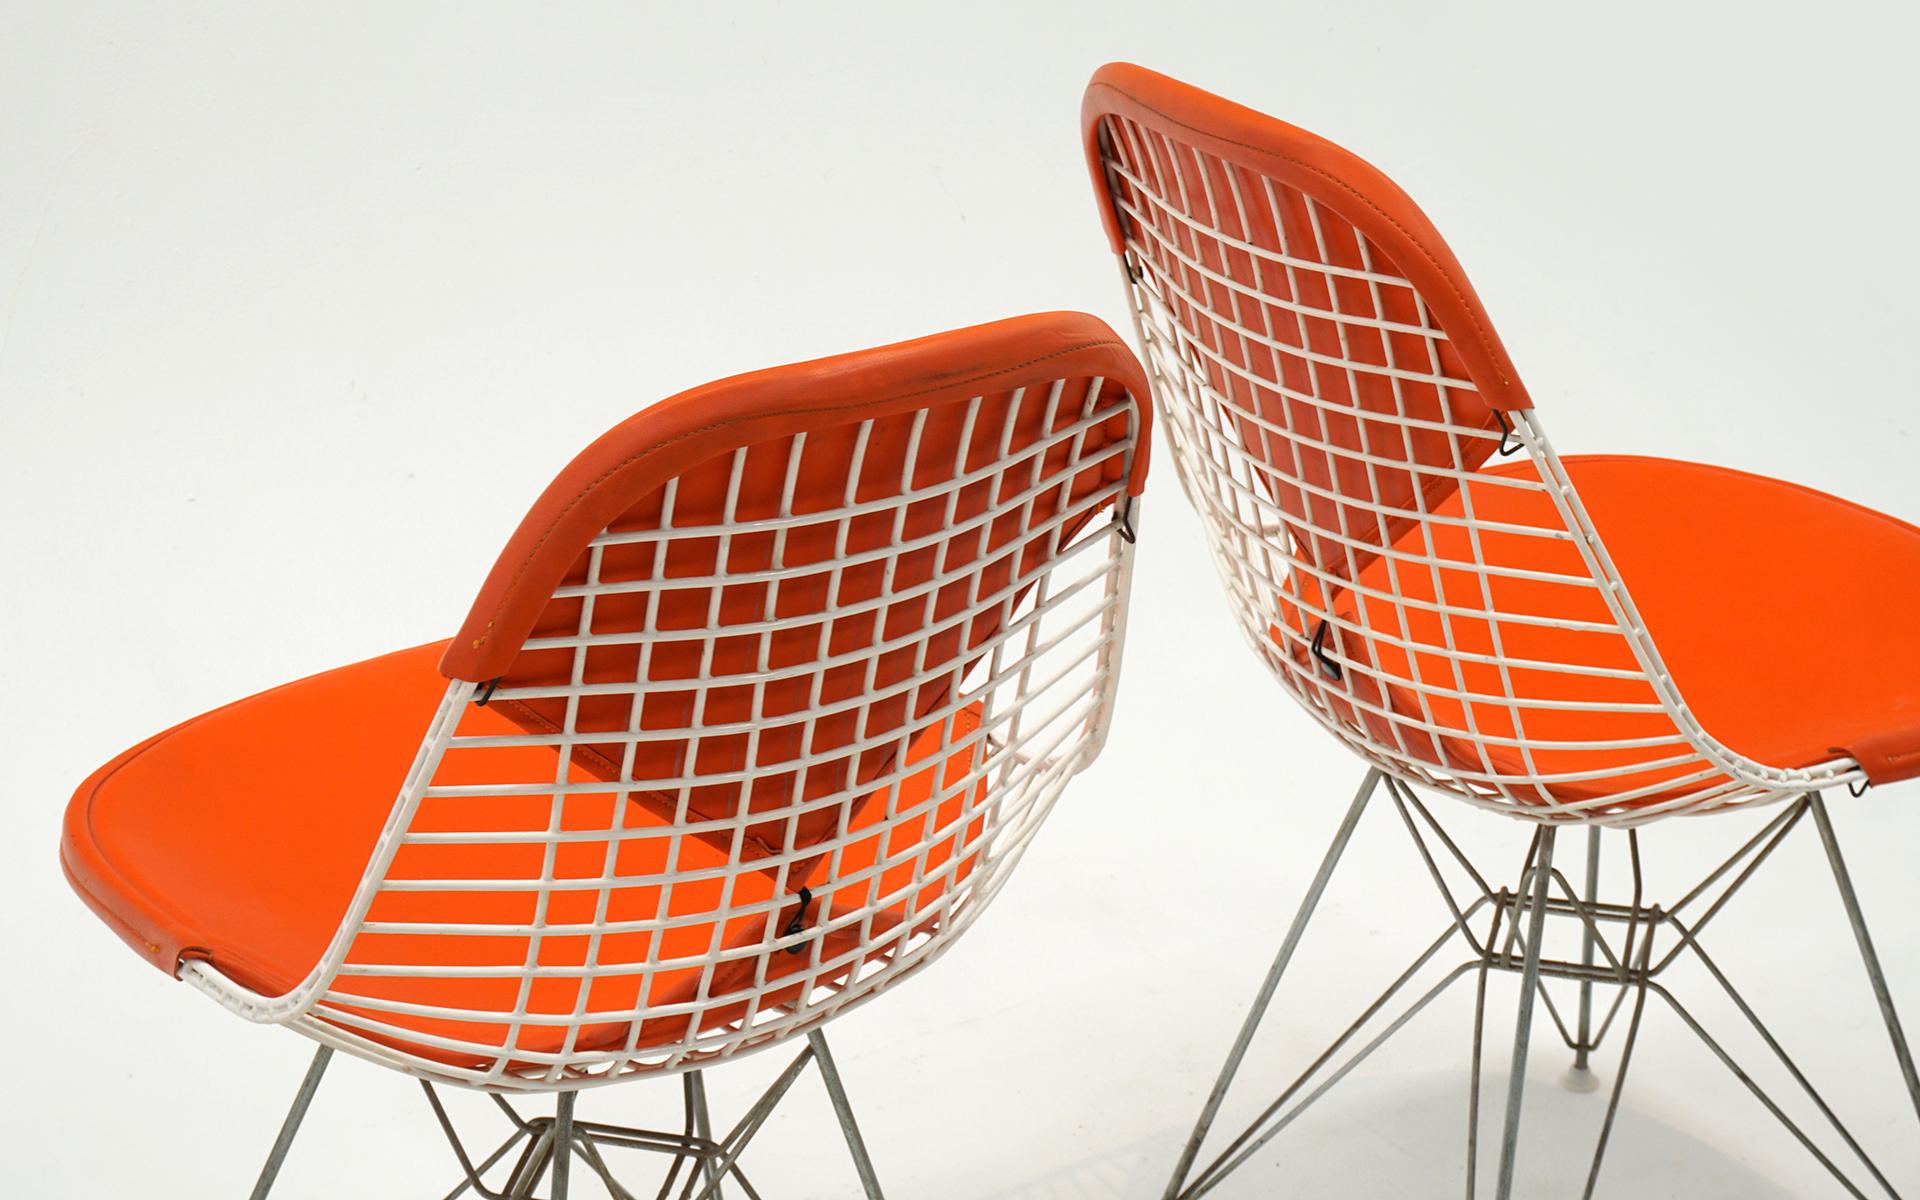 American Four Eames White Wire DKR Dining Chairs, Eiffel Tower Base, Orange Bikini Covers